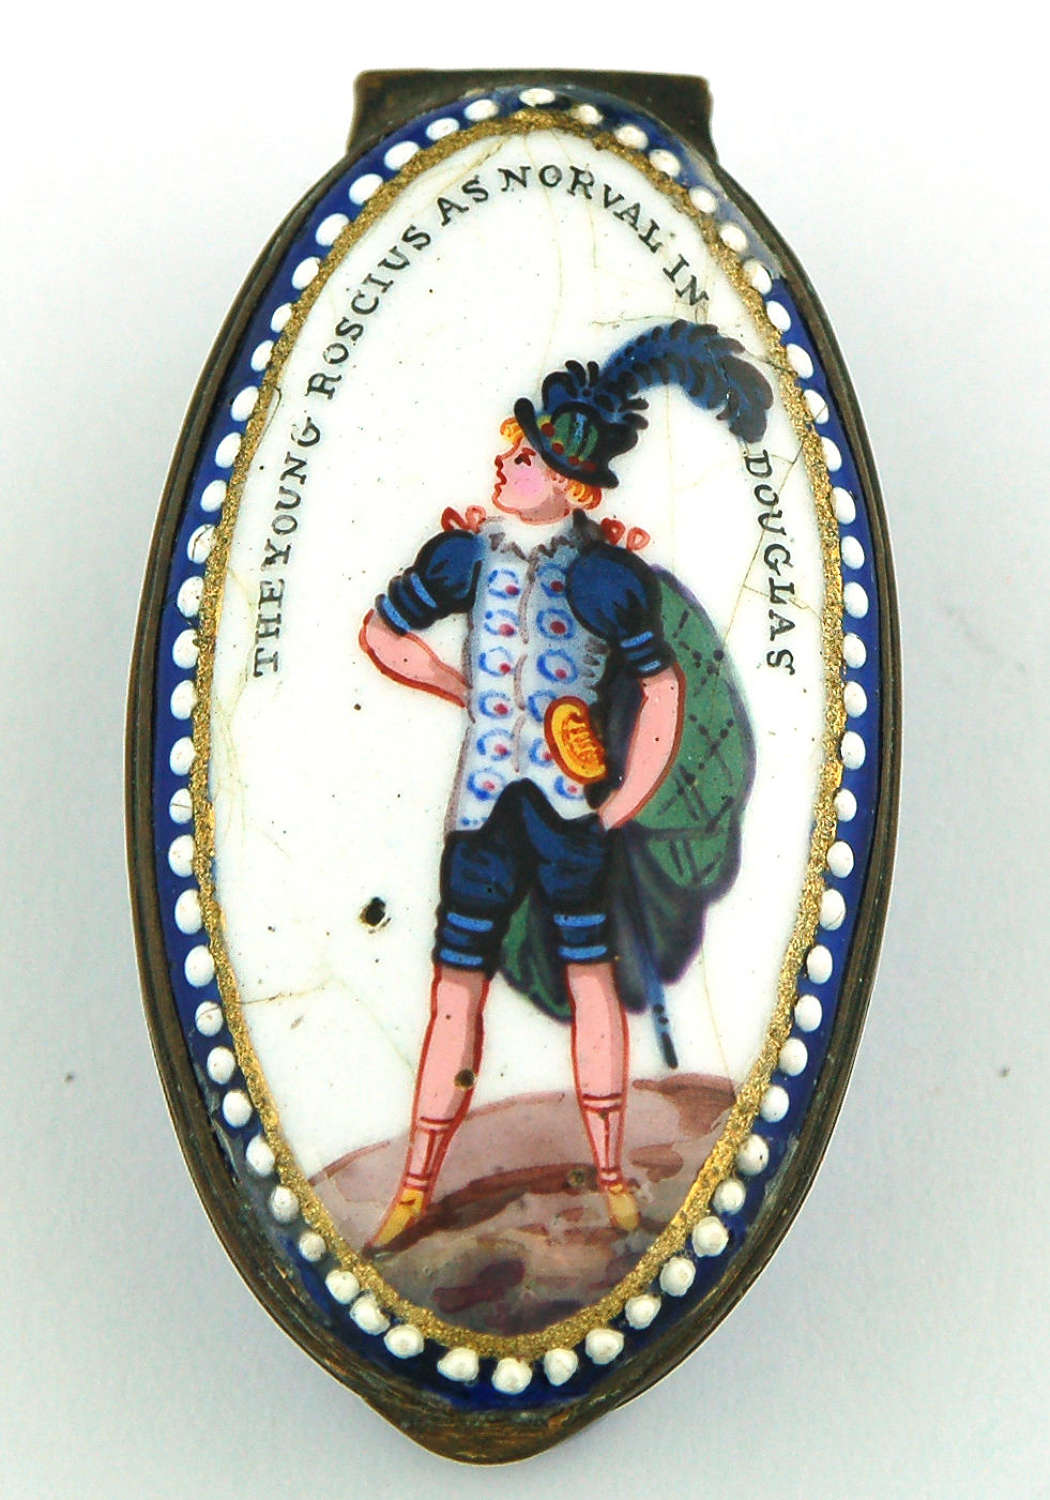 Enamel patch box depicting the Young Roscius as Norval C1805